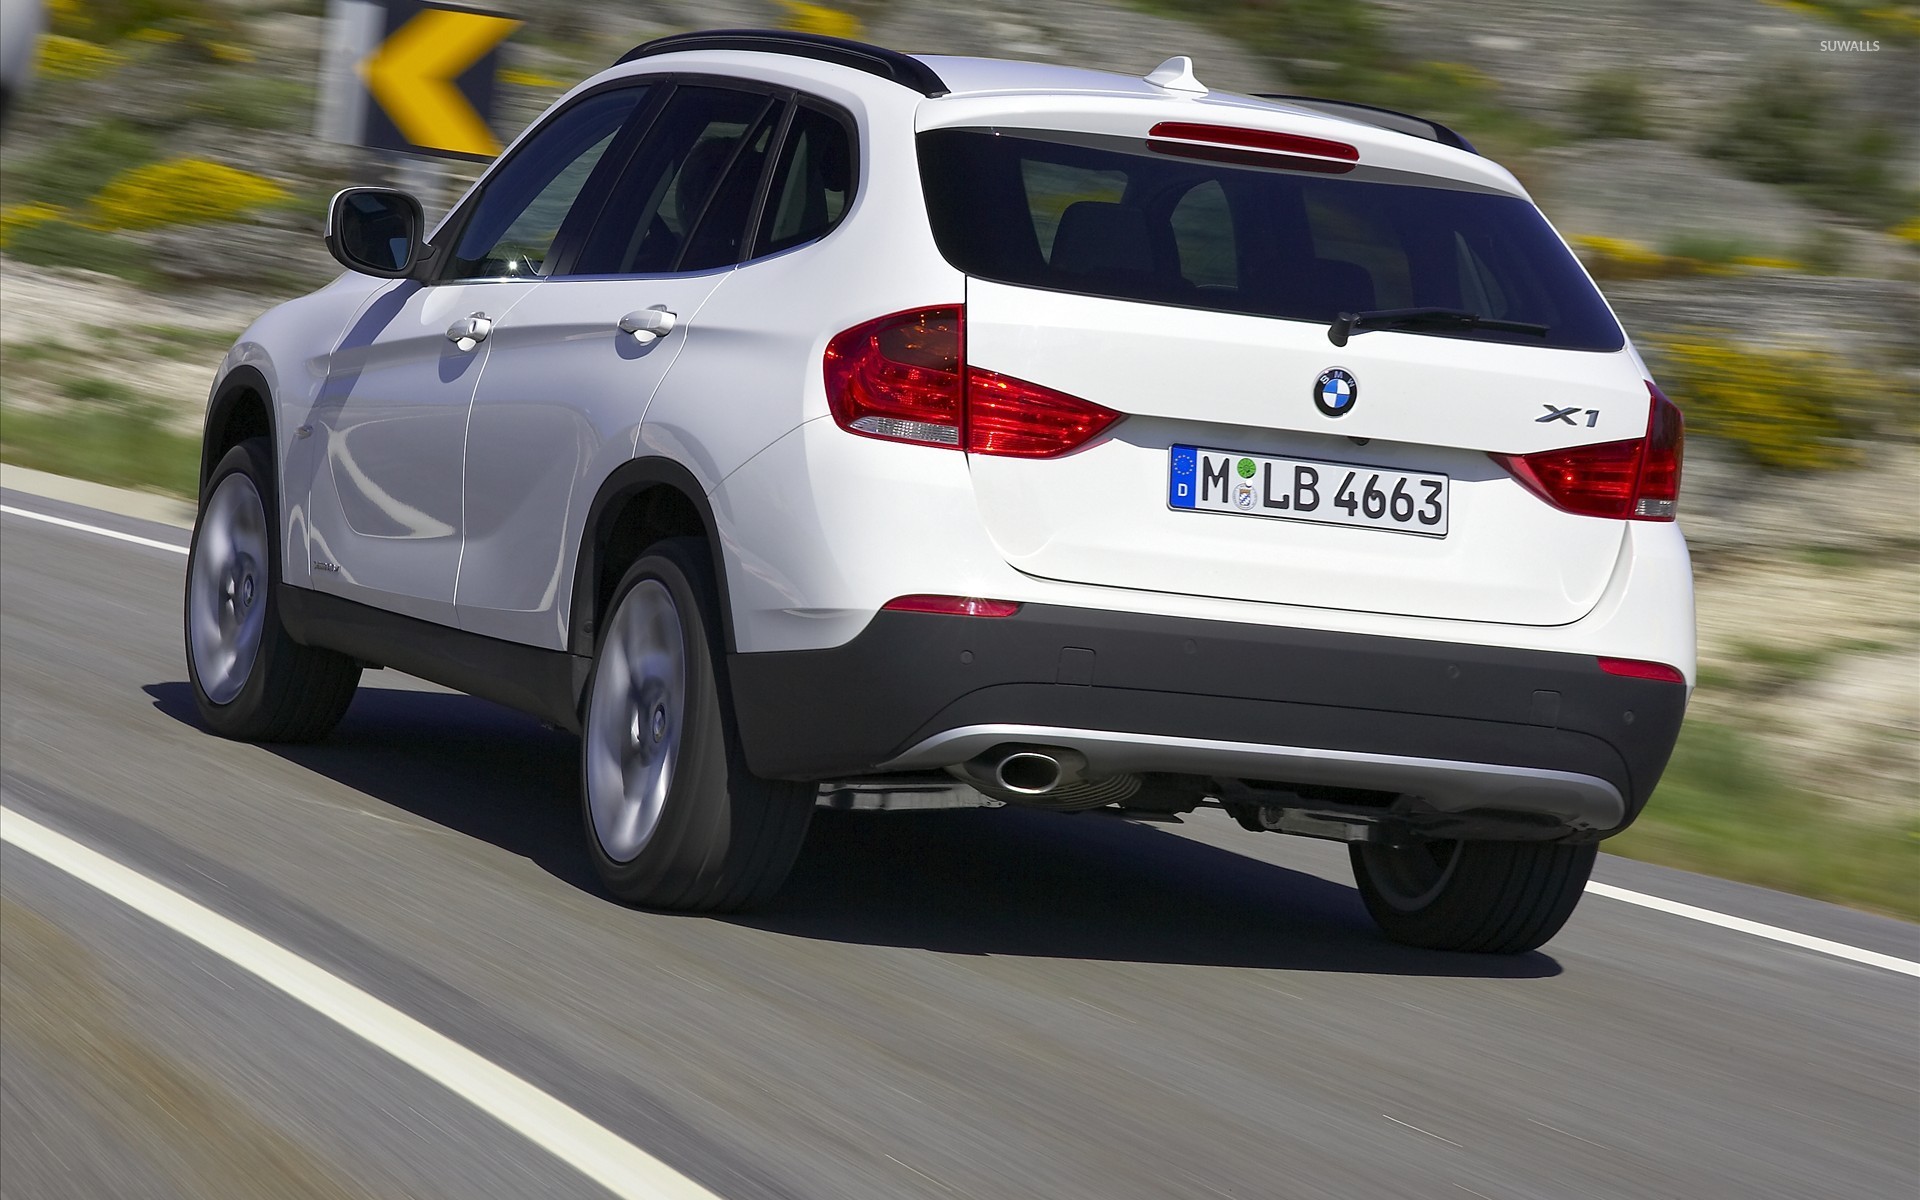 Bmw X1 Wallpapers